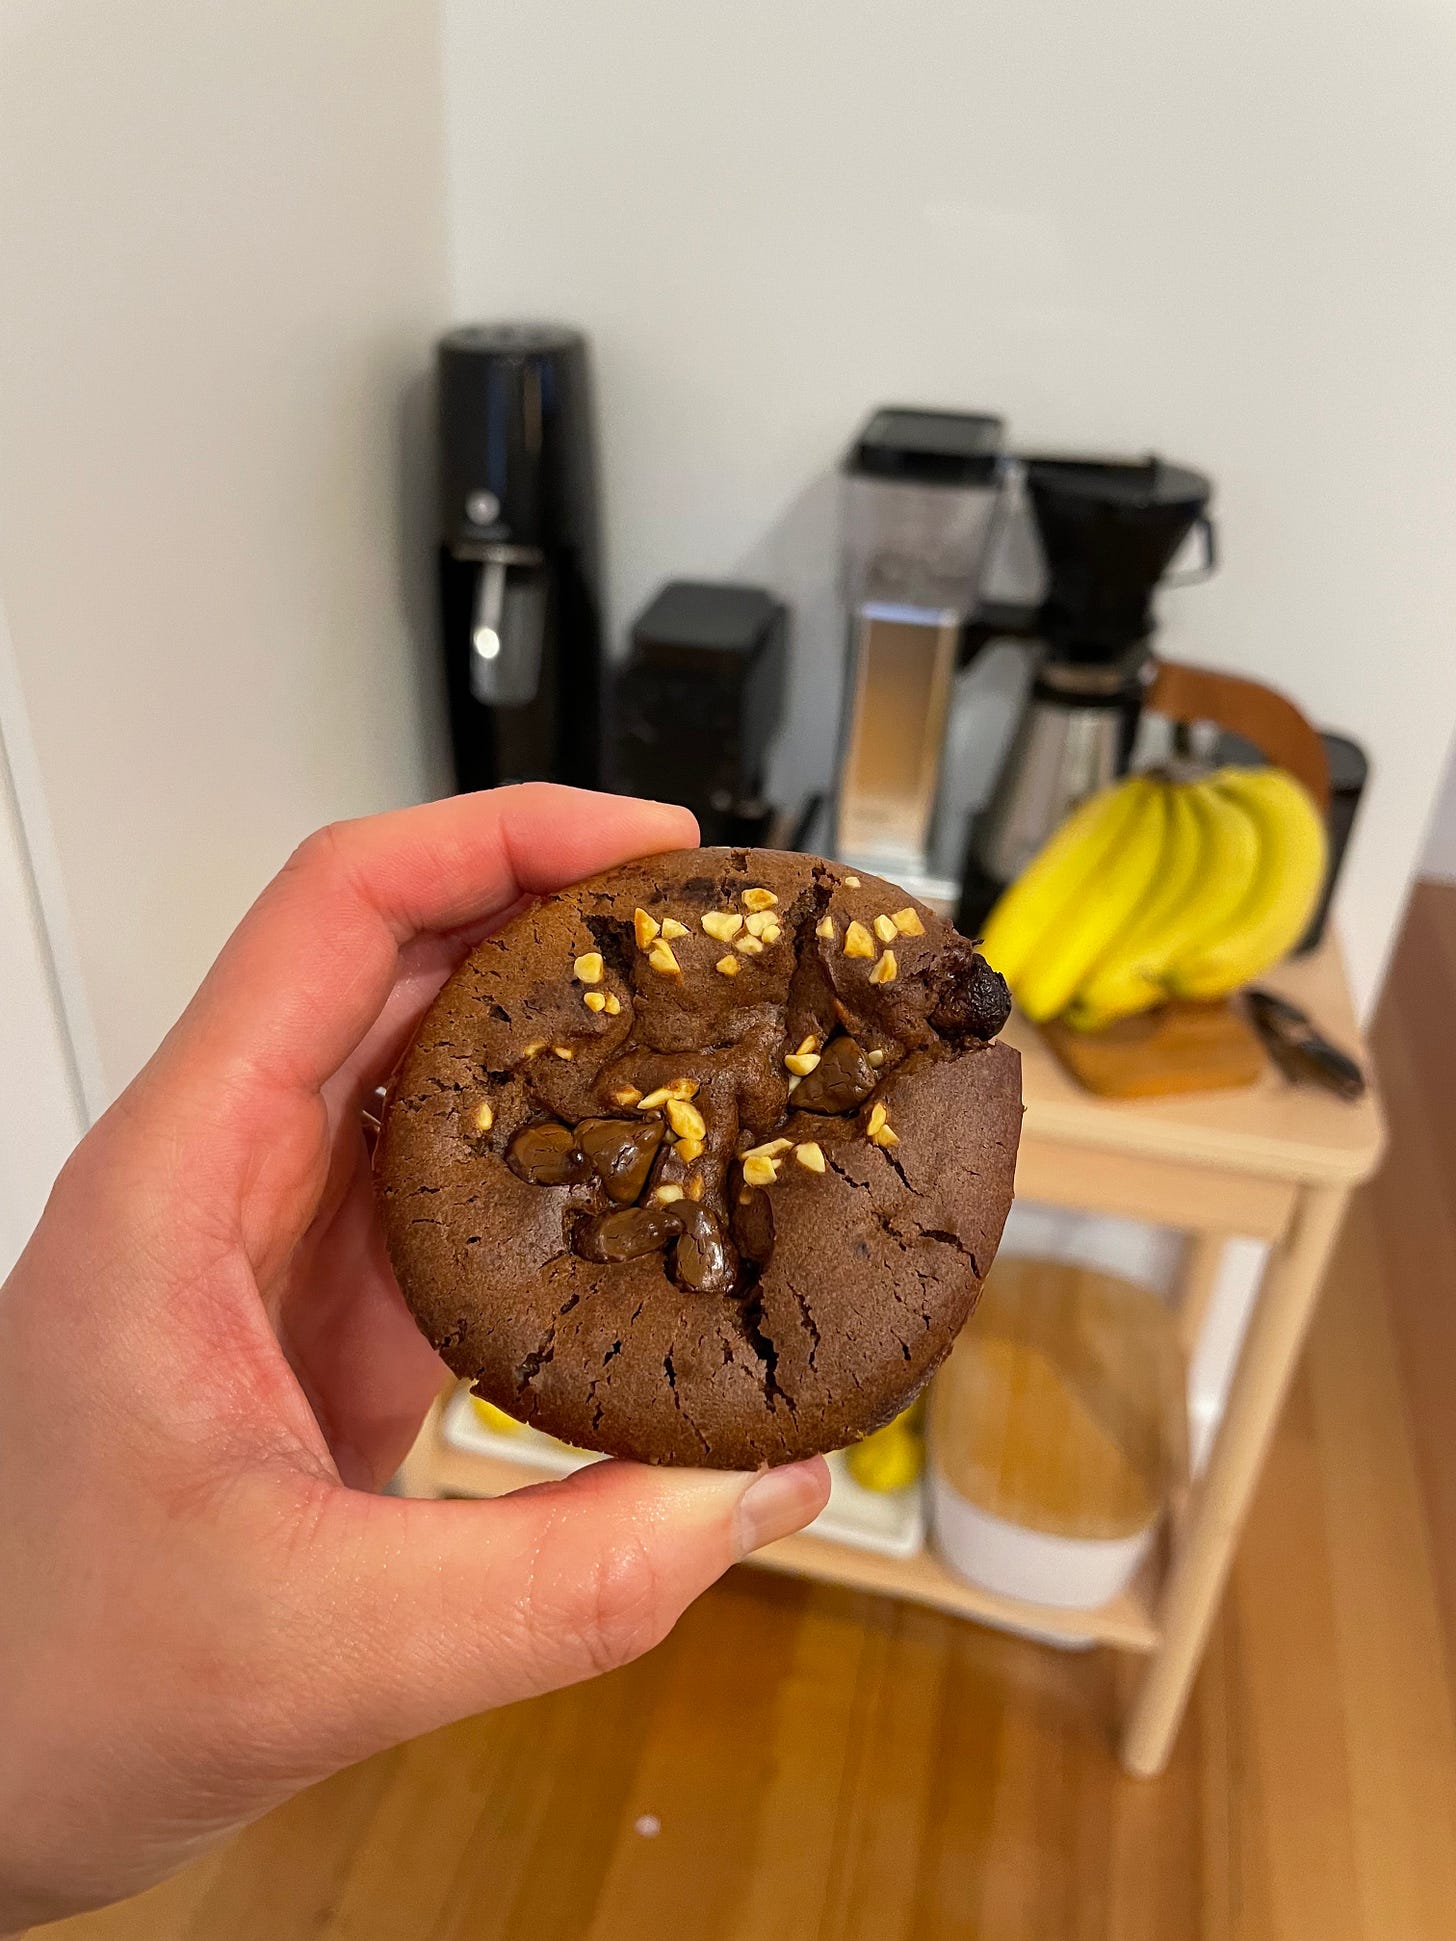 Chocolate muffin with chopped peanuts and choc chips sprinkled on top. A coffee machine and bananas on a kitchen bench in the background.